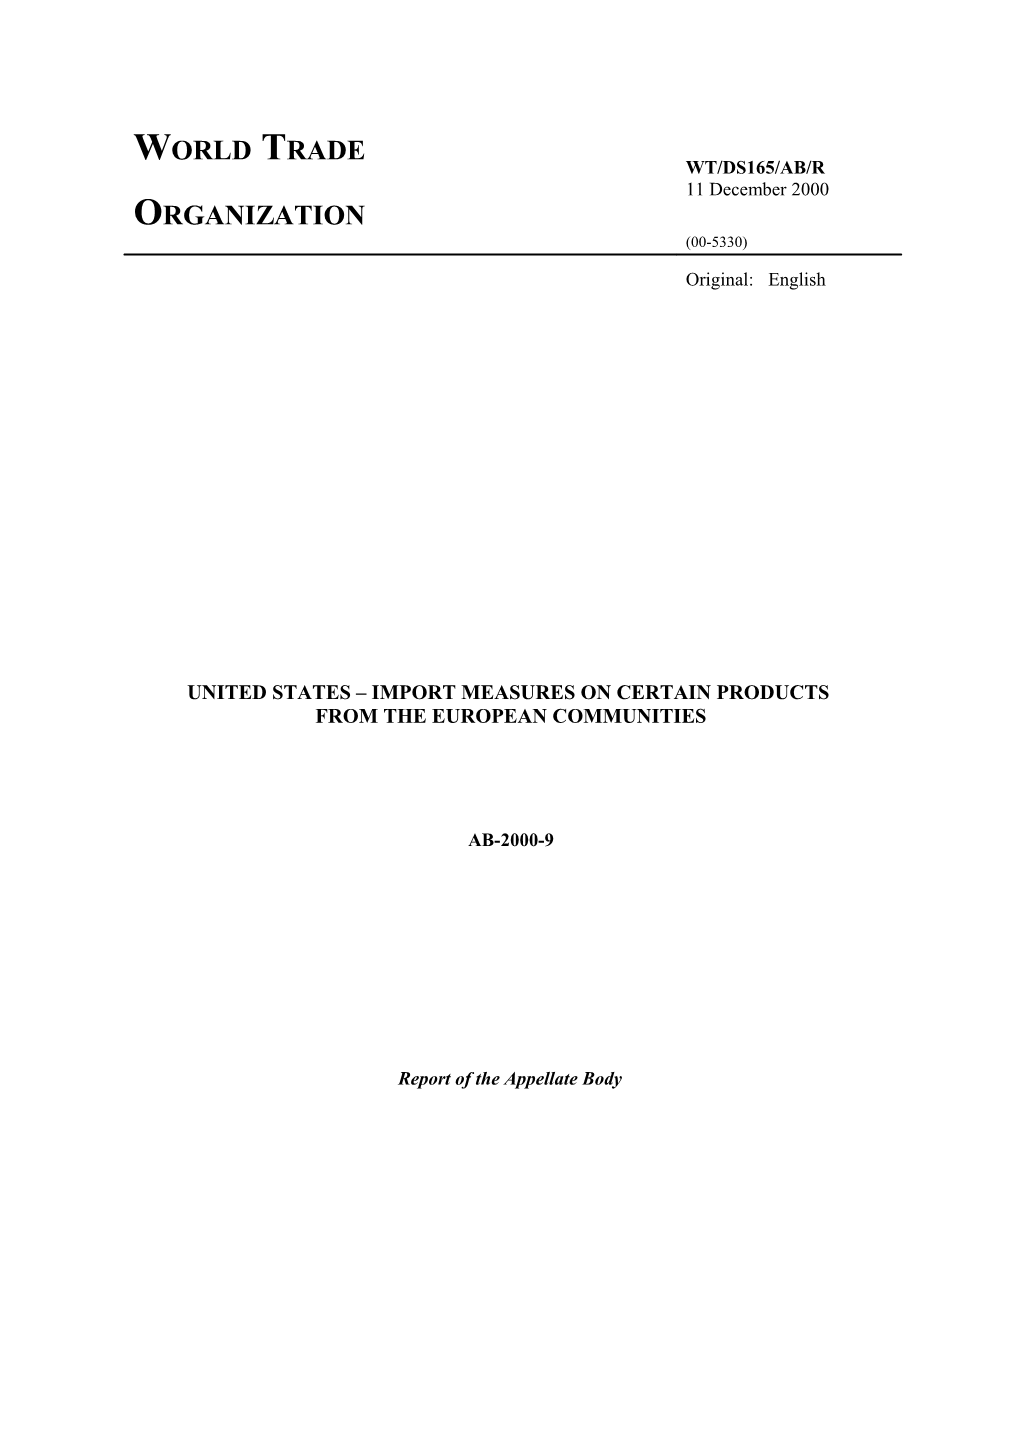 United States Import Measures on Certain Products